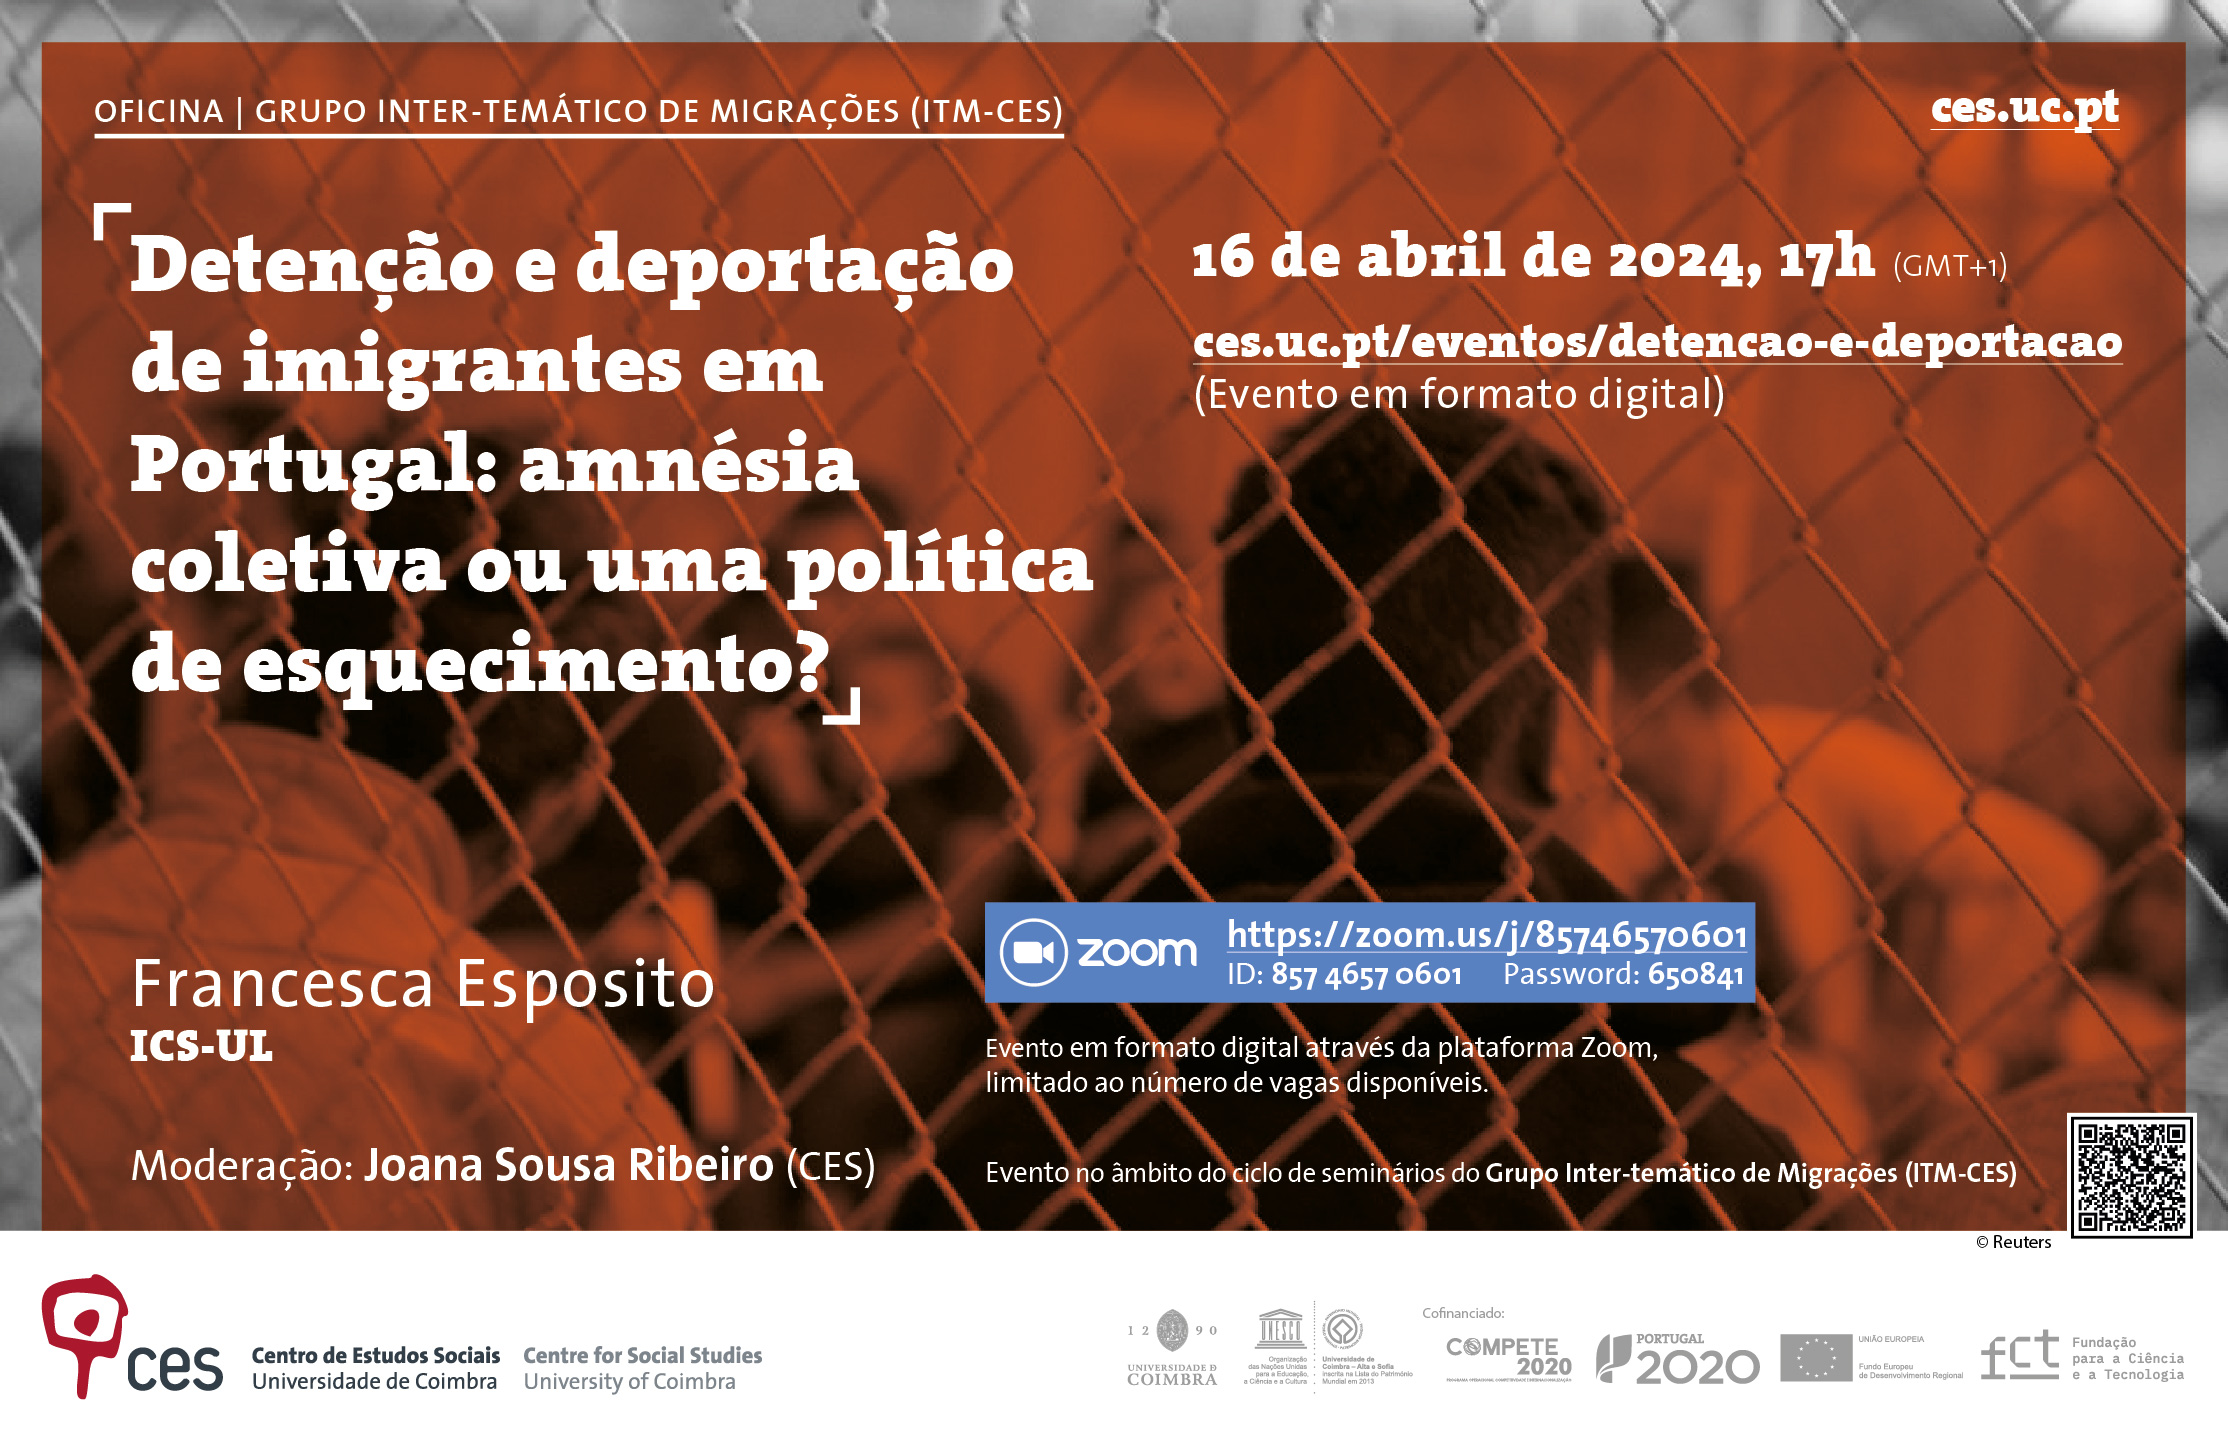 Detention and deportation of immigrants in Portugal: collective amnesia or a policy of forgetting?<span id="edit_45634"><script>$(function() { $('#edit_45634').load( "/myces/user/editobj.php?tipo=evento&id=45634" ); });</script></span>